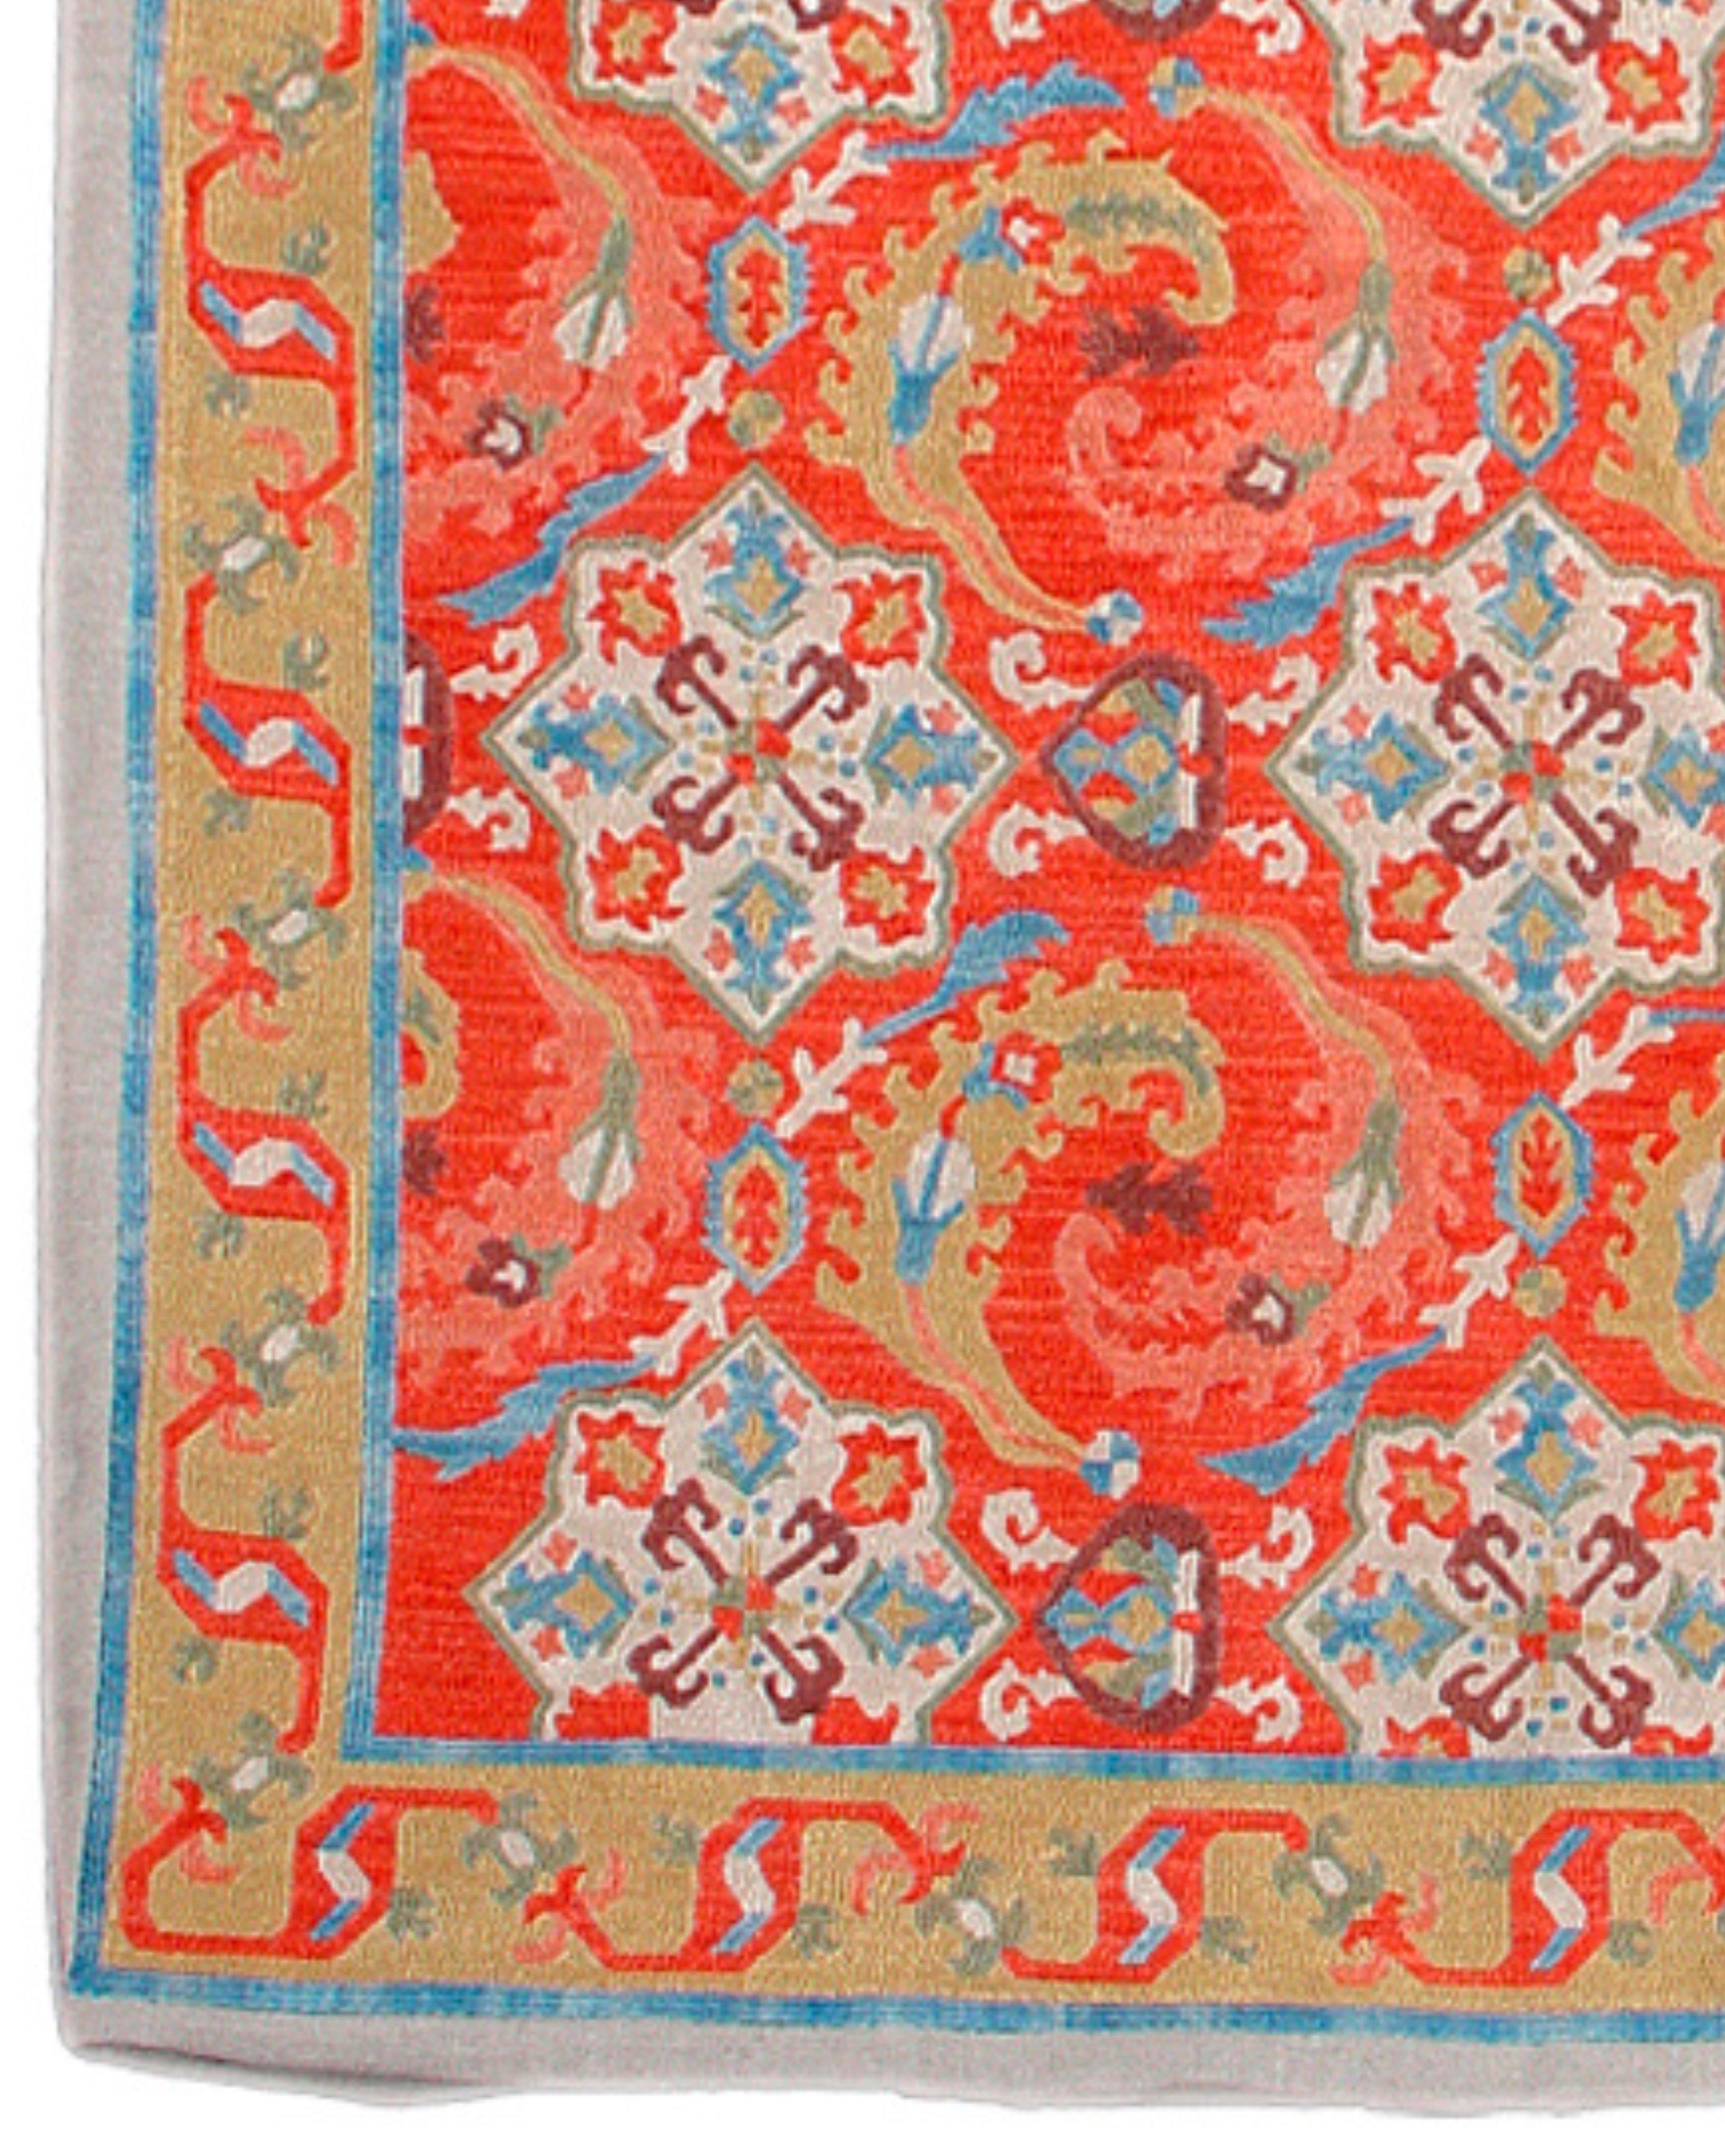 Embroidered Antique Armenian Silk Embroidery Rug, Late 20th Century  For Sale